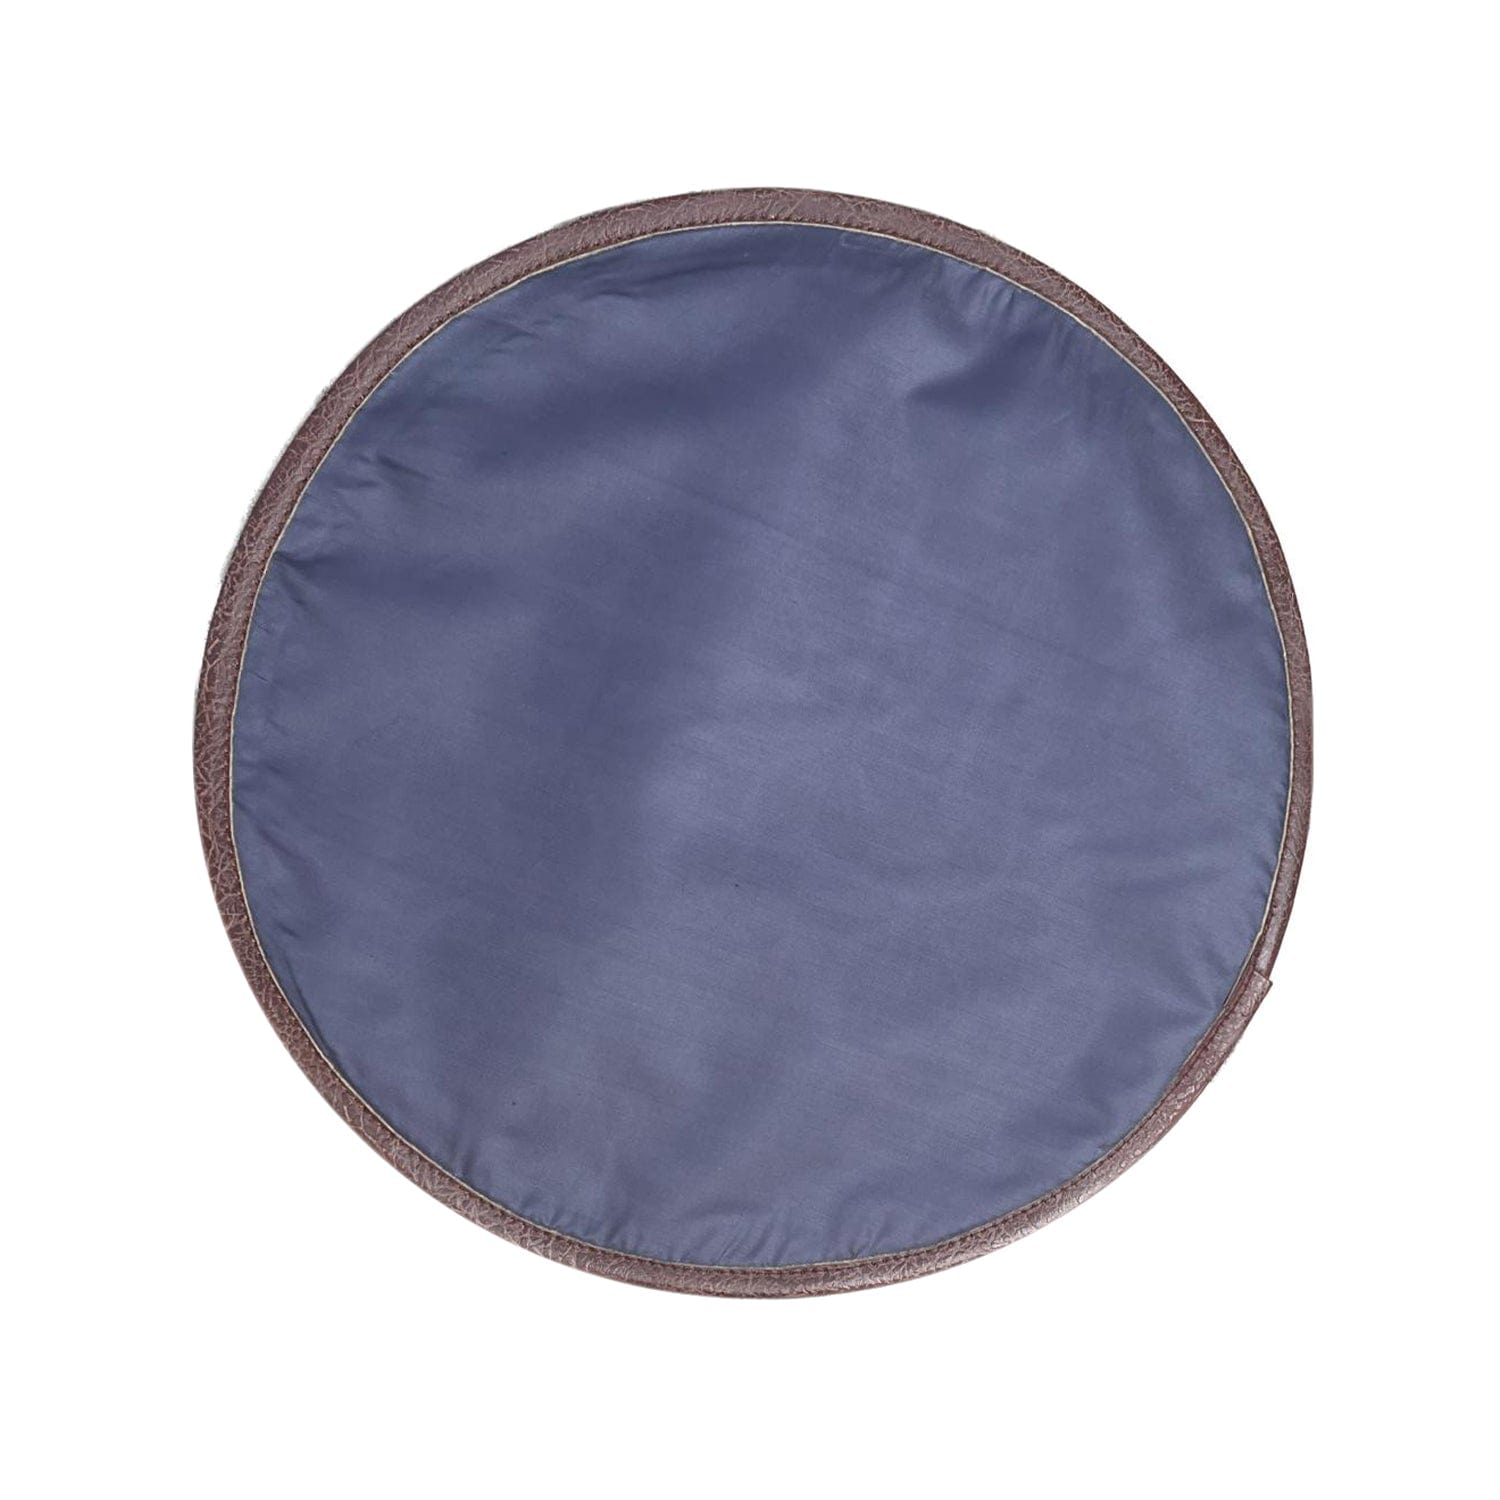 Mona-B Coaster Mona B Set of 4 Printed Coasters, 4.5 INCH Round, Best for Bed-Side Table/Center Table, Dining Table - PC-111